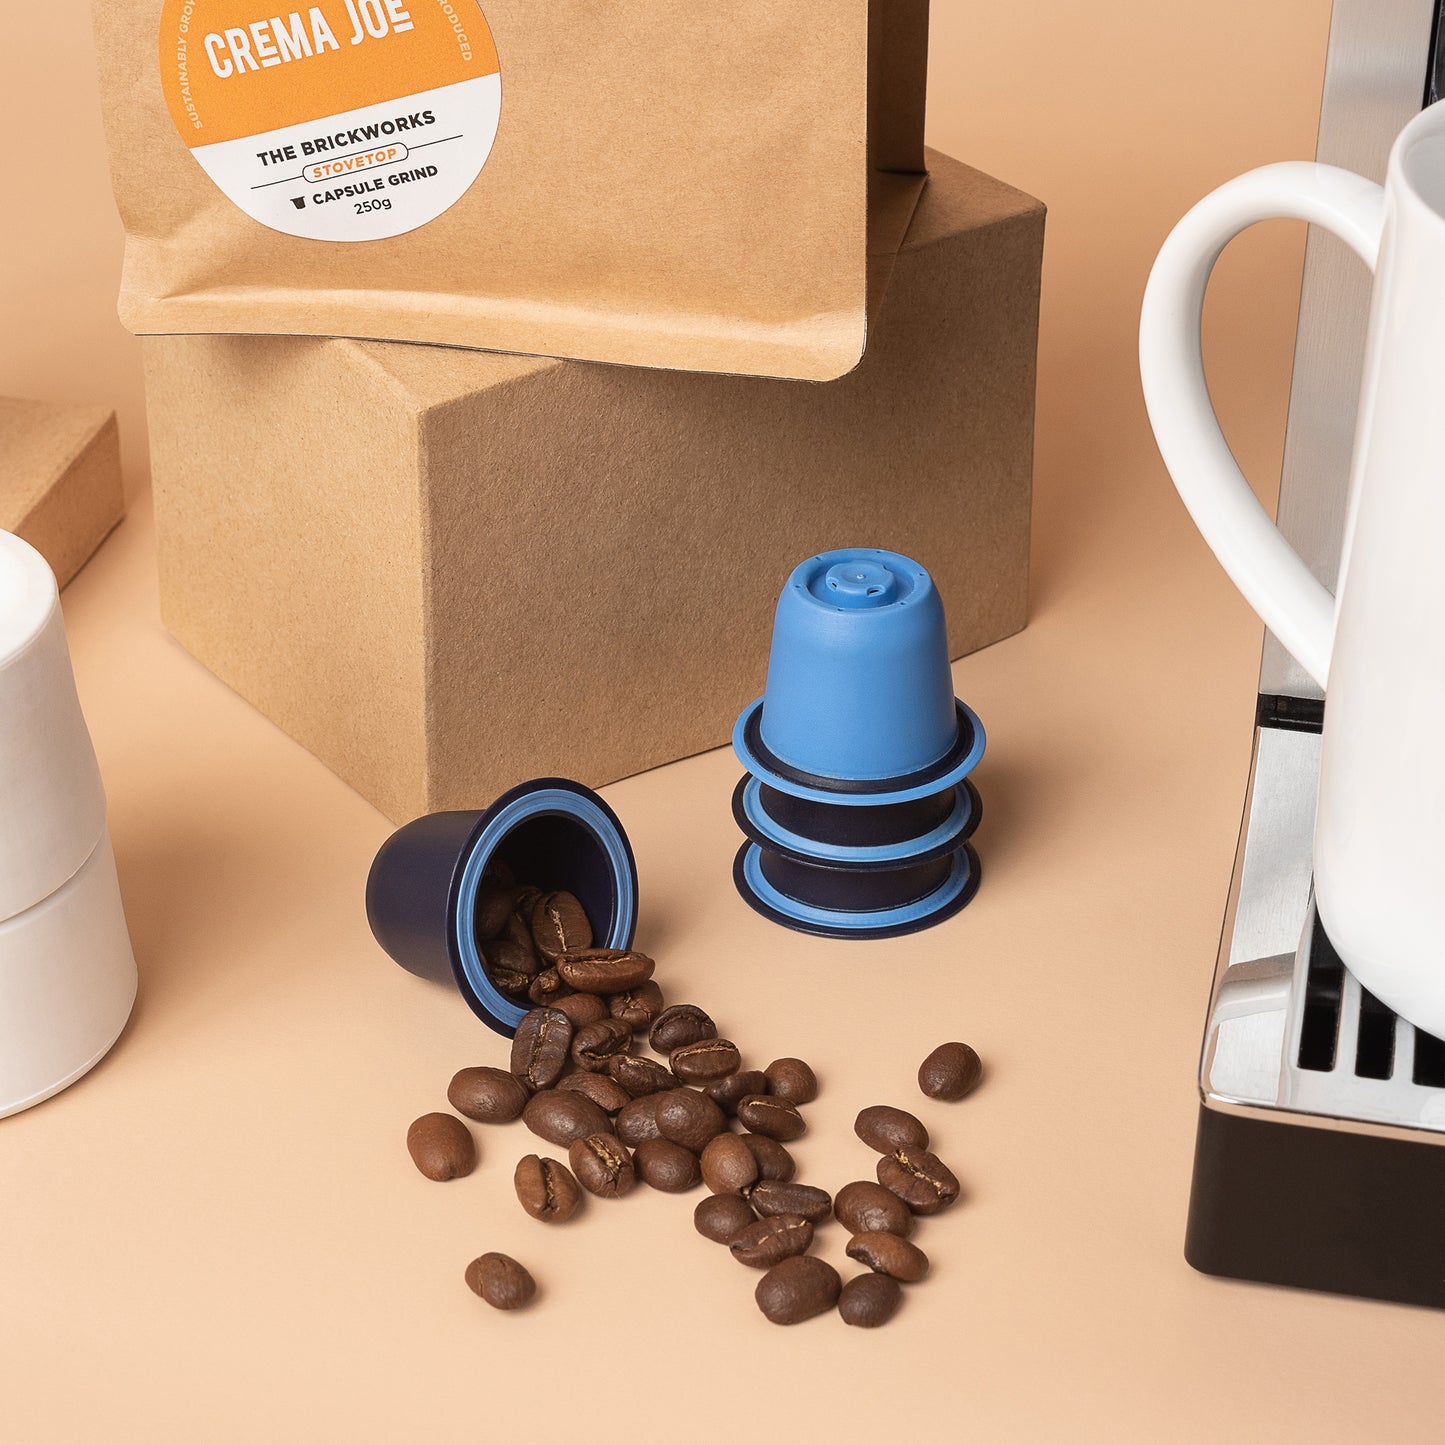 Bluecup pods: Best reusable/refillable capsules for a strong coffee and great crema